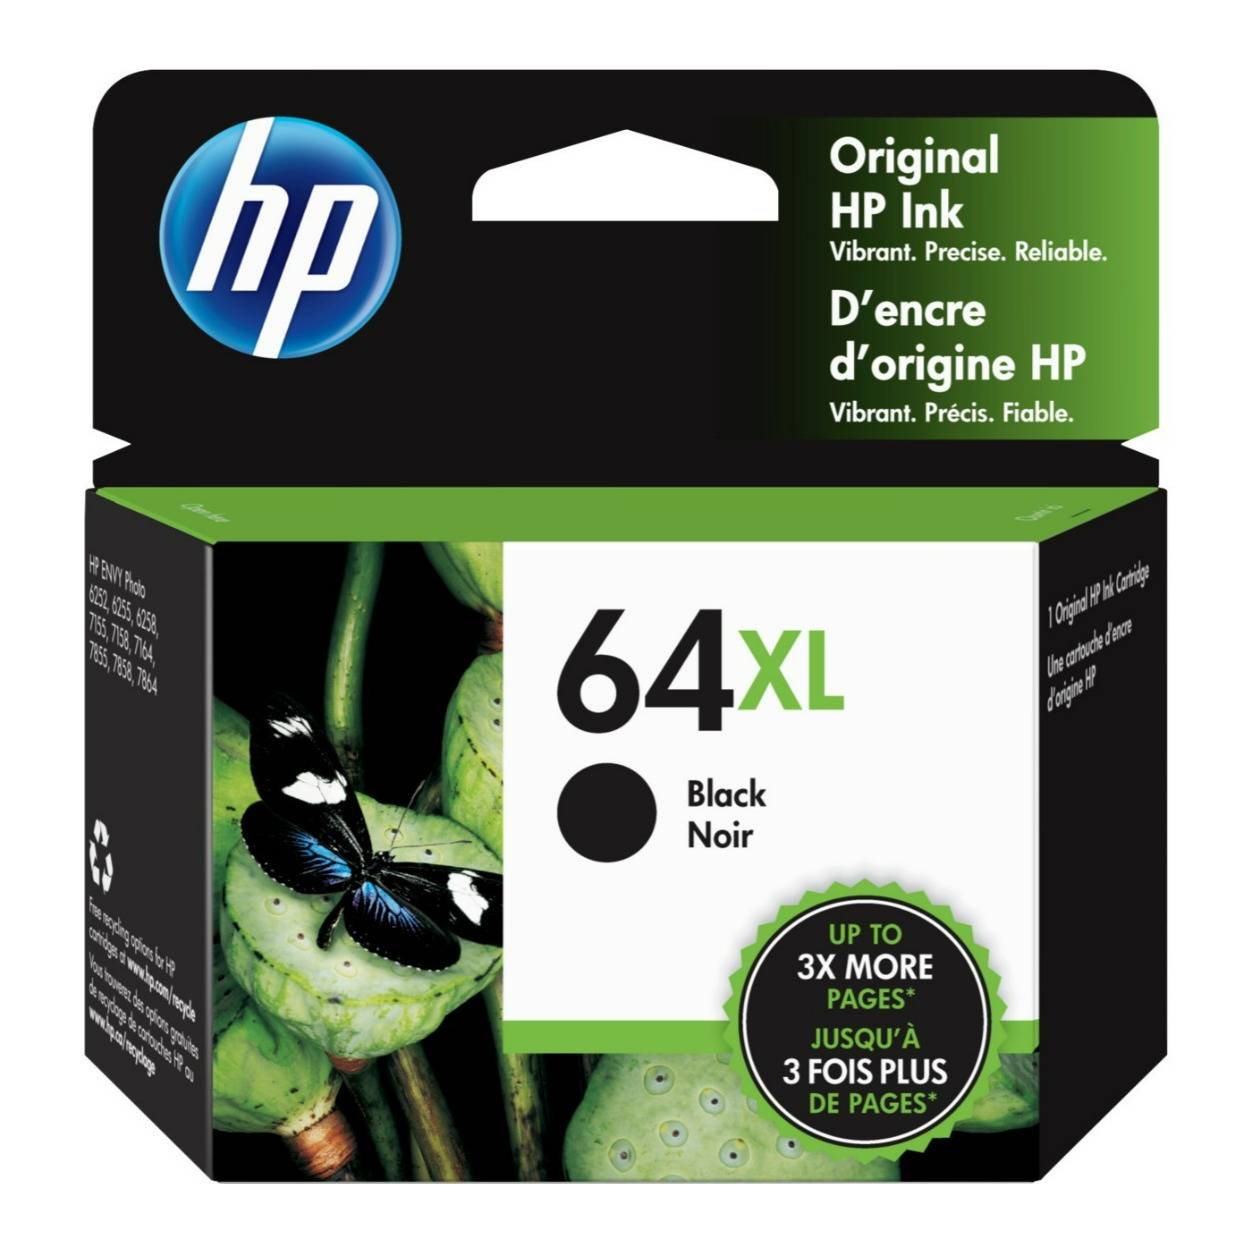 HP 64XL Pigment-based, Environment-Friendly, Black High Yield Original Ink Cartridge (600 Pages)